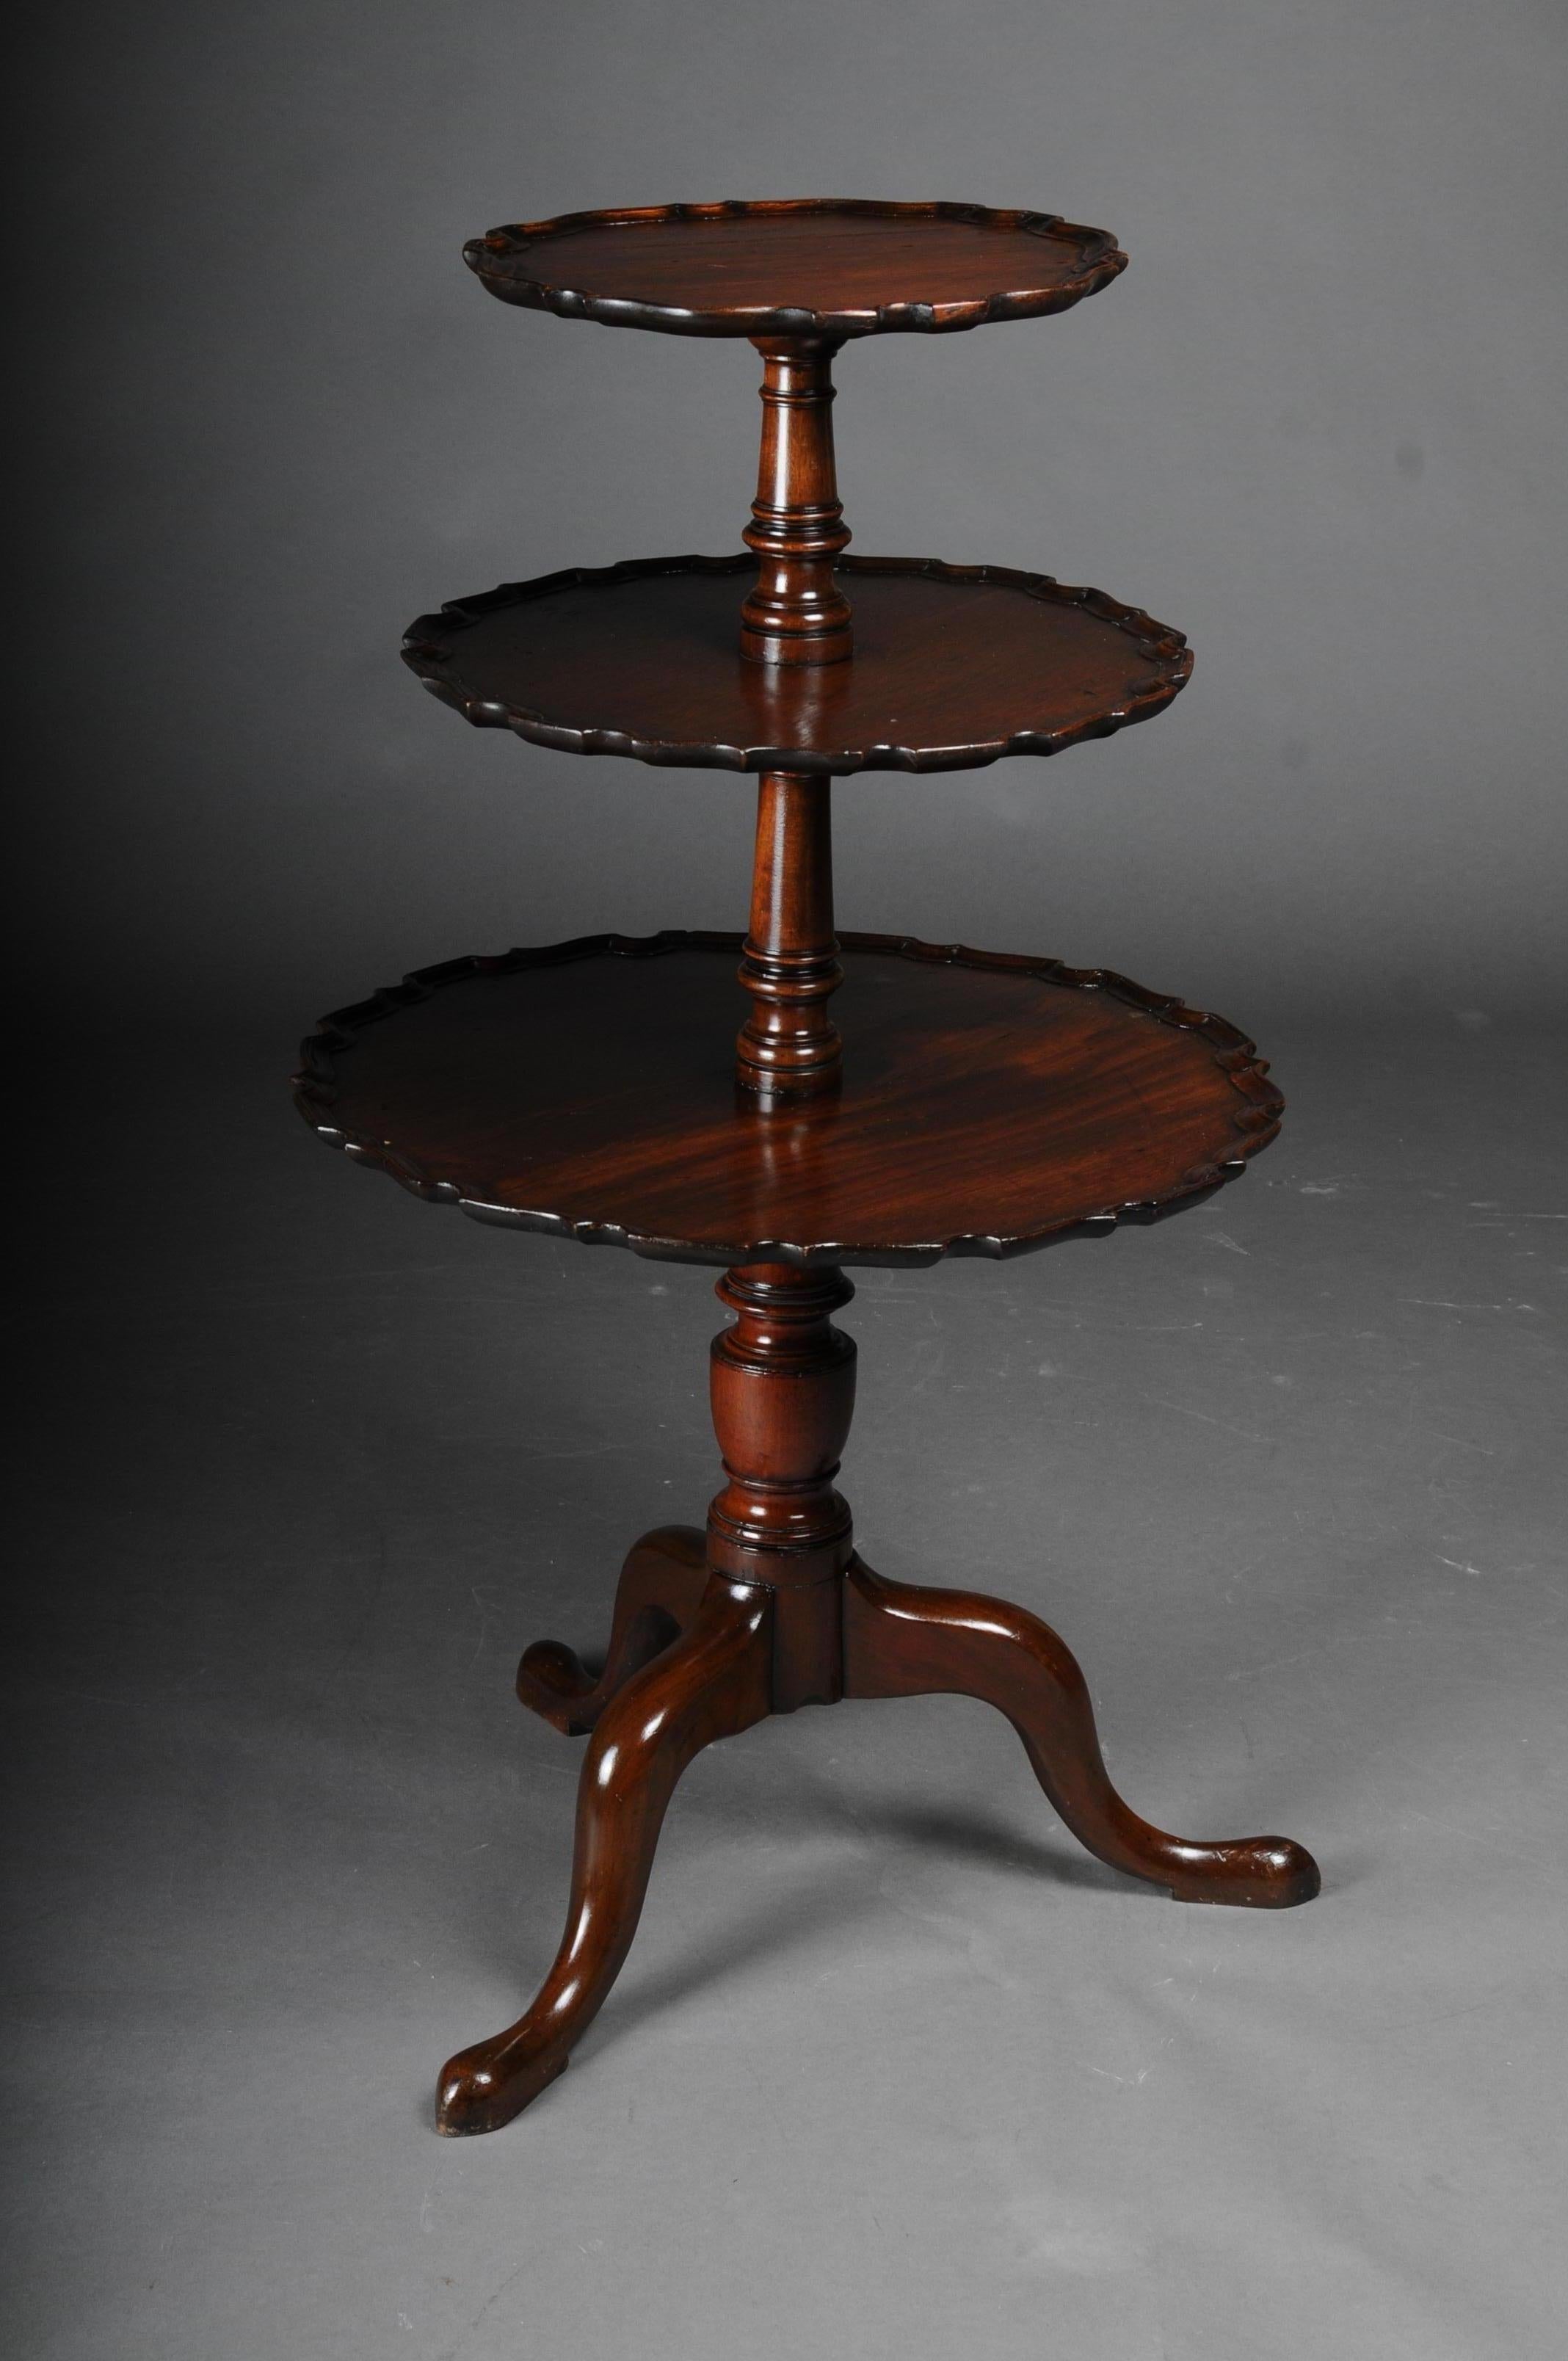 19th century rare English side table / étagère, Victorian, mahogany
Solid mahogany wood with three-tier, profiled shelves. Pillar shaft, turned and also made of solid mahogany. Basalt table / étagère standing on 3 curved ones.
An absolute rarity